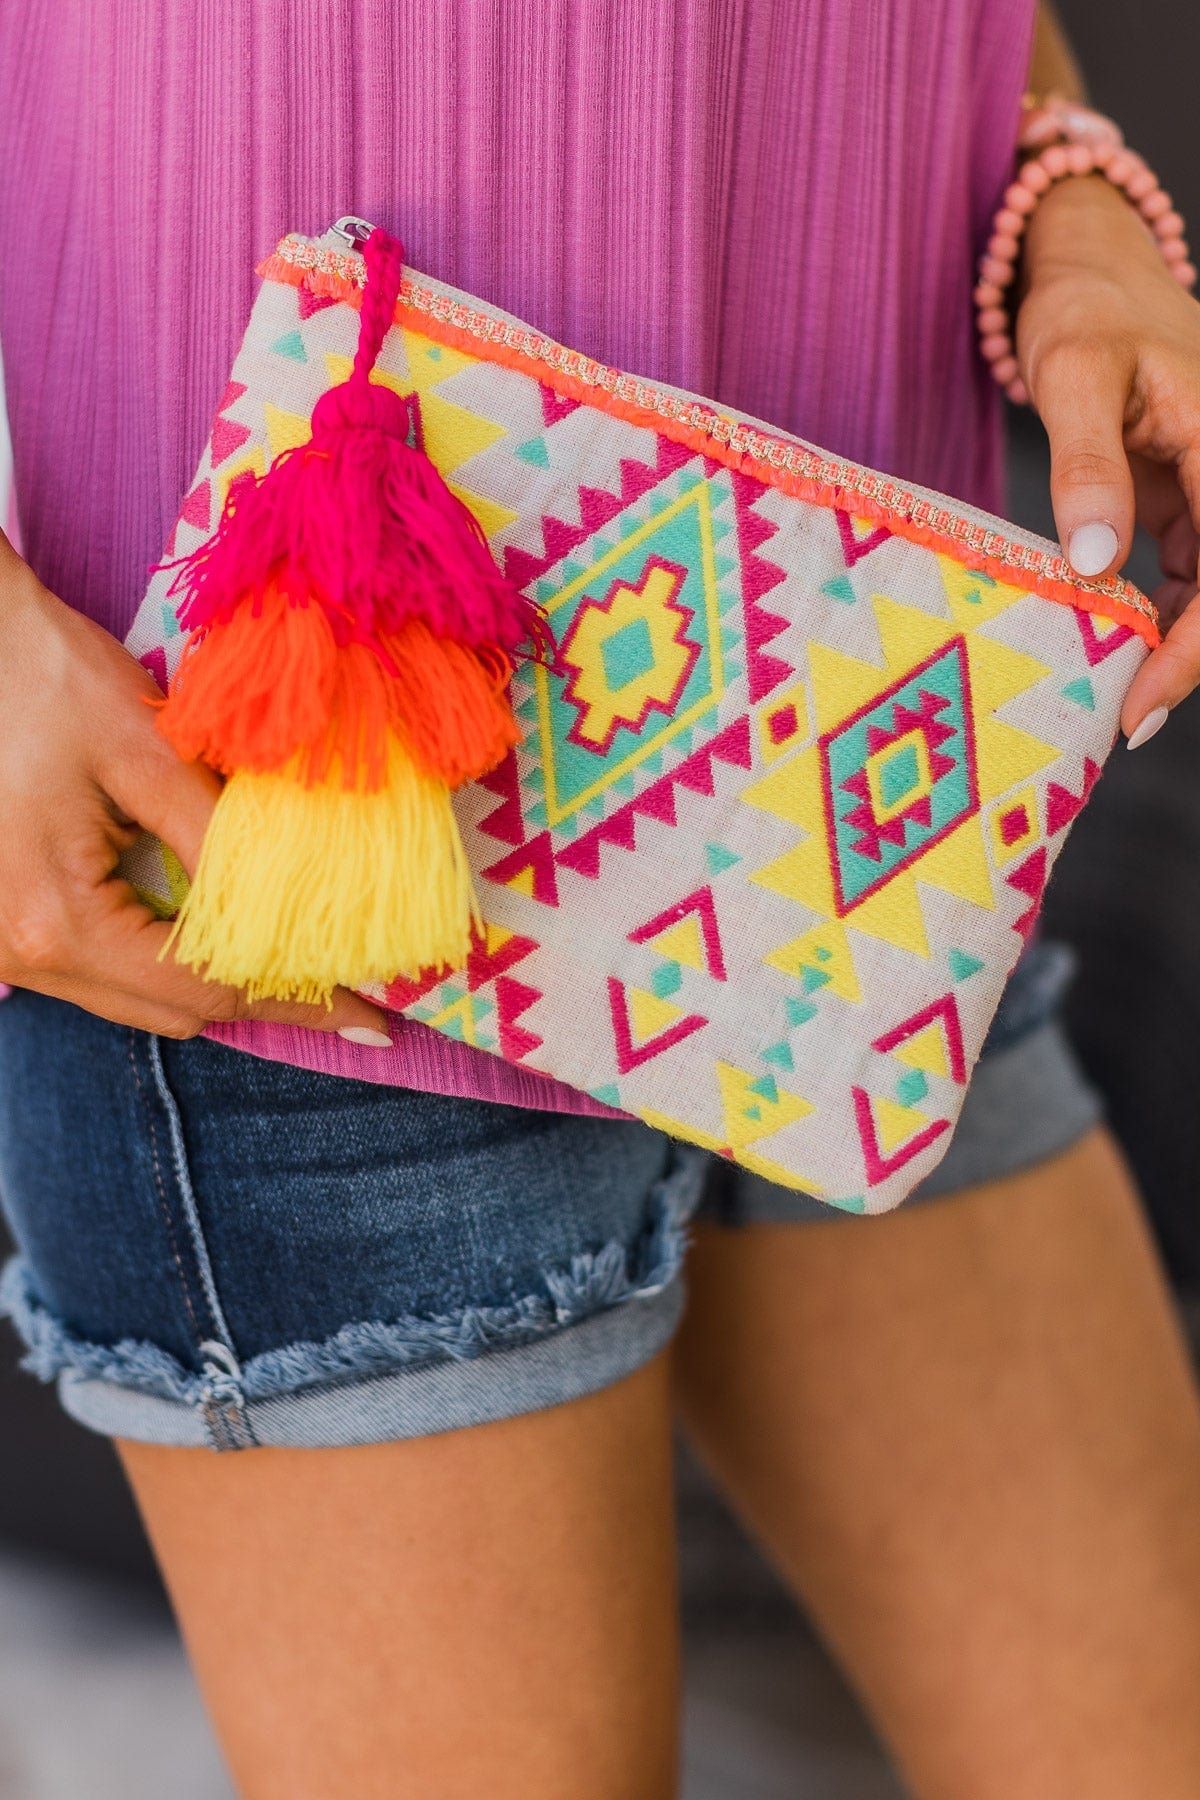 Creative Ways to Make Your Own Bag Tassels at Home